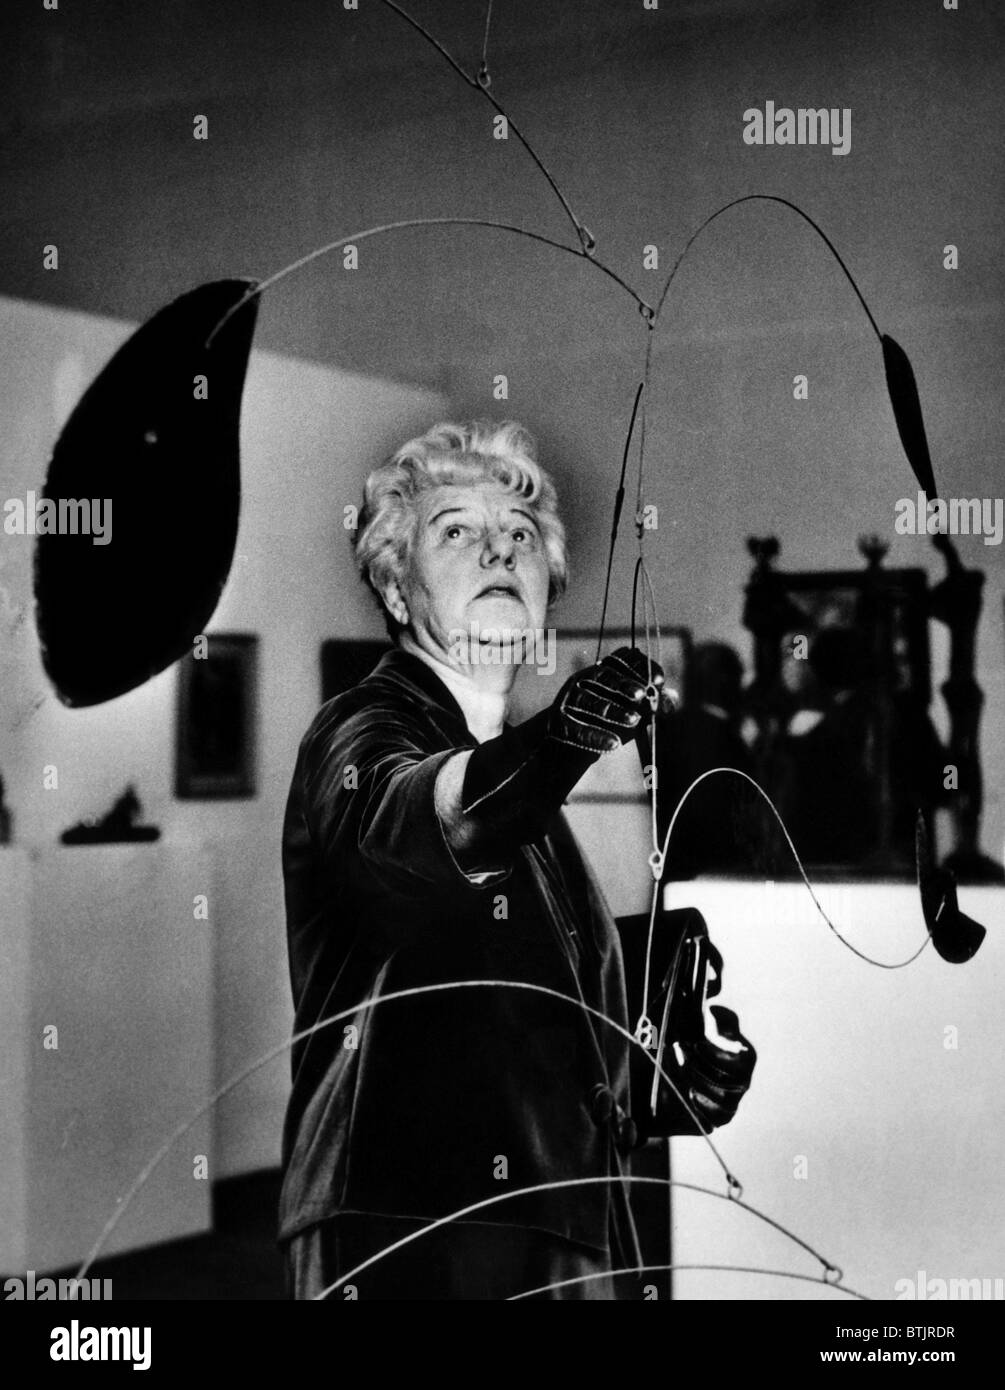 Peggy Guggenheim adjusts Alexander Calder's 'Mobile' at a special exhibit of her famed collection of art at the Tate Gallery, Lo Stock Photo